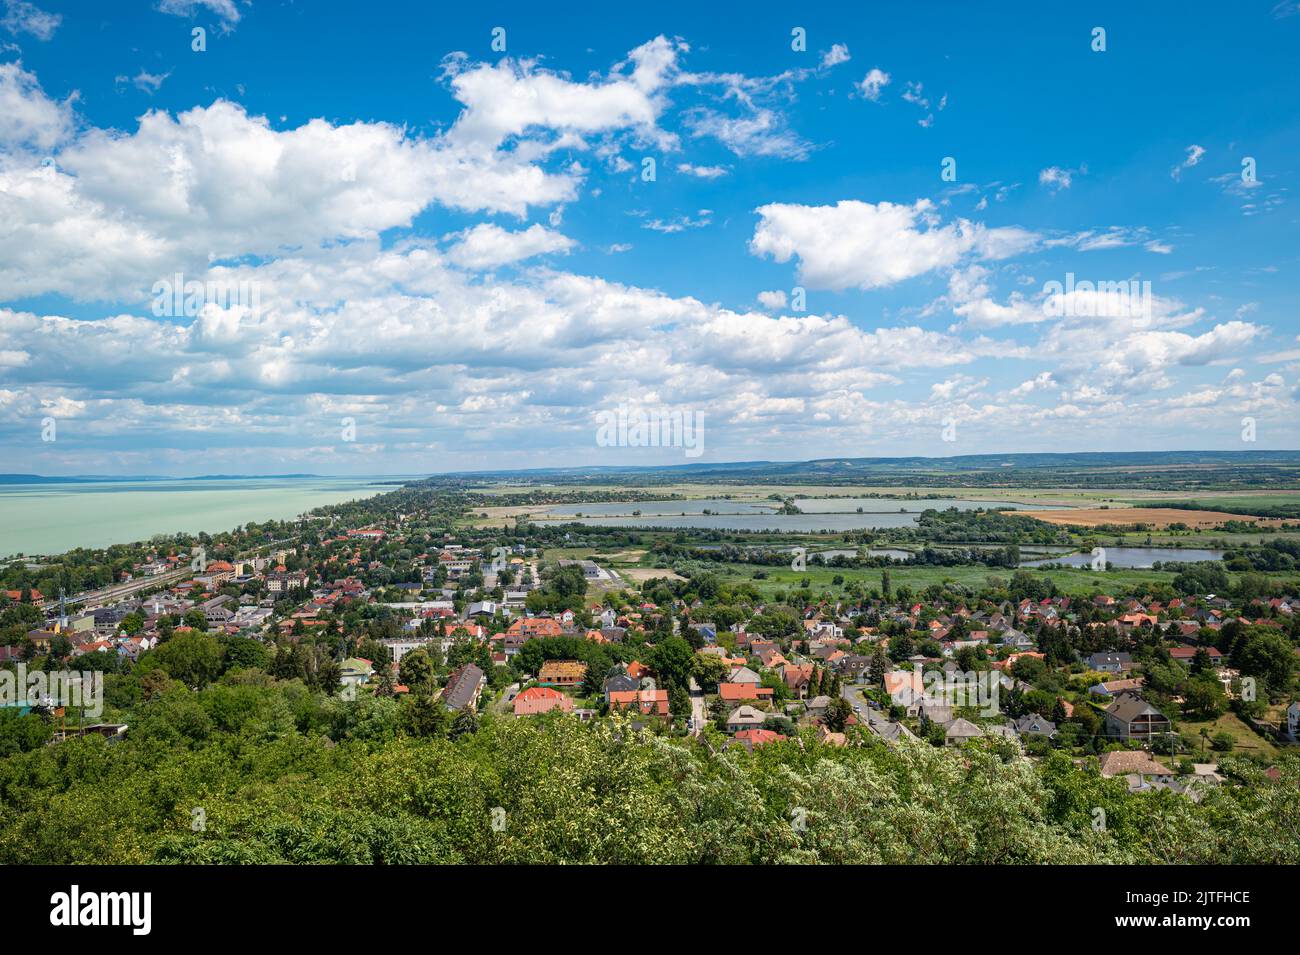 View in northeasterly direction from a watchtower on hill 'Sipos Hegy'. Visible is the town of Fonyód and the shore of Lake Balaton in Hungary. Stock Photo